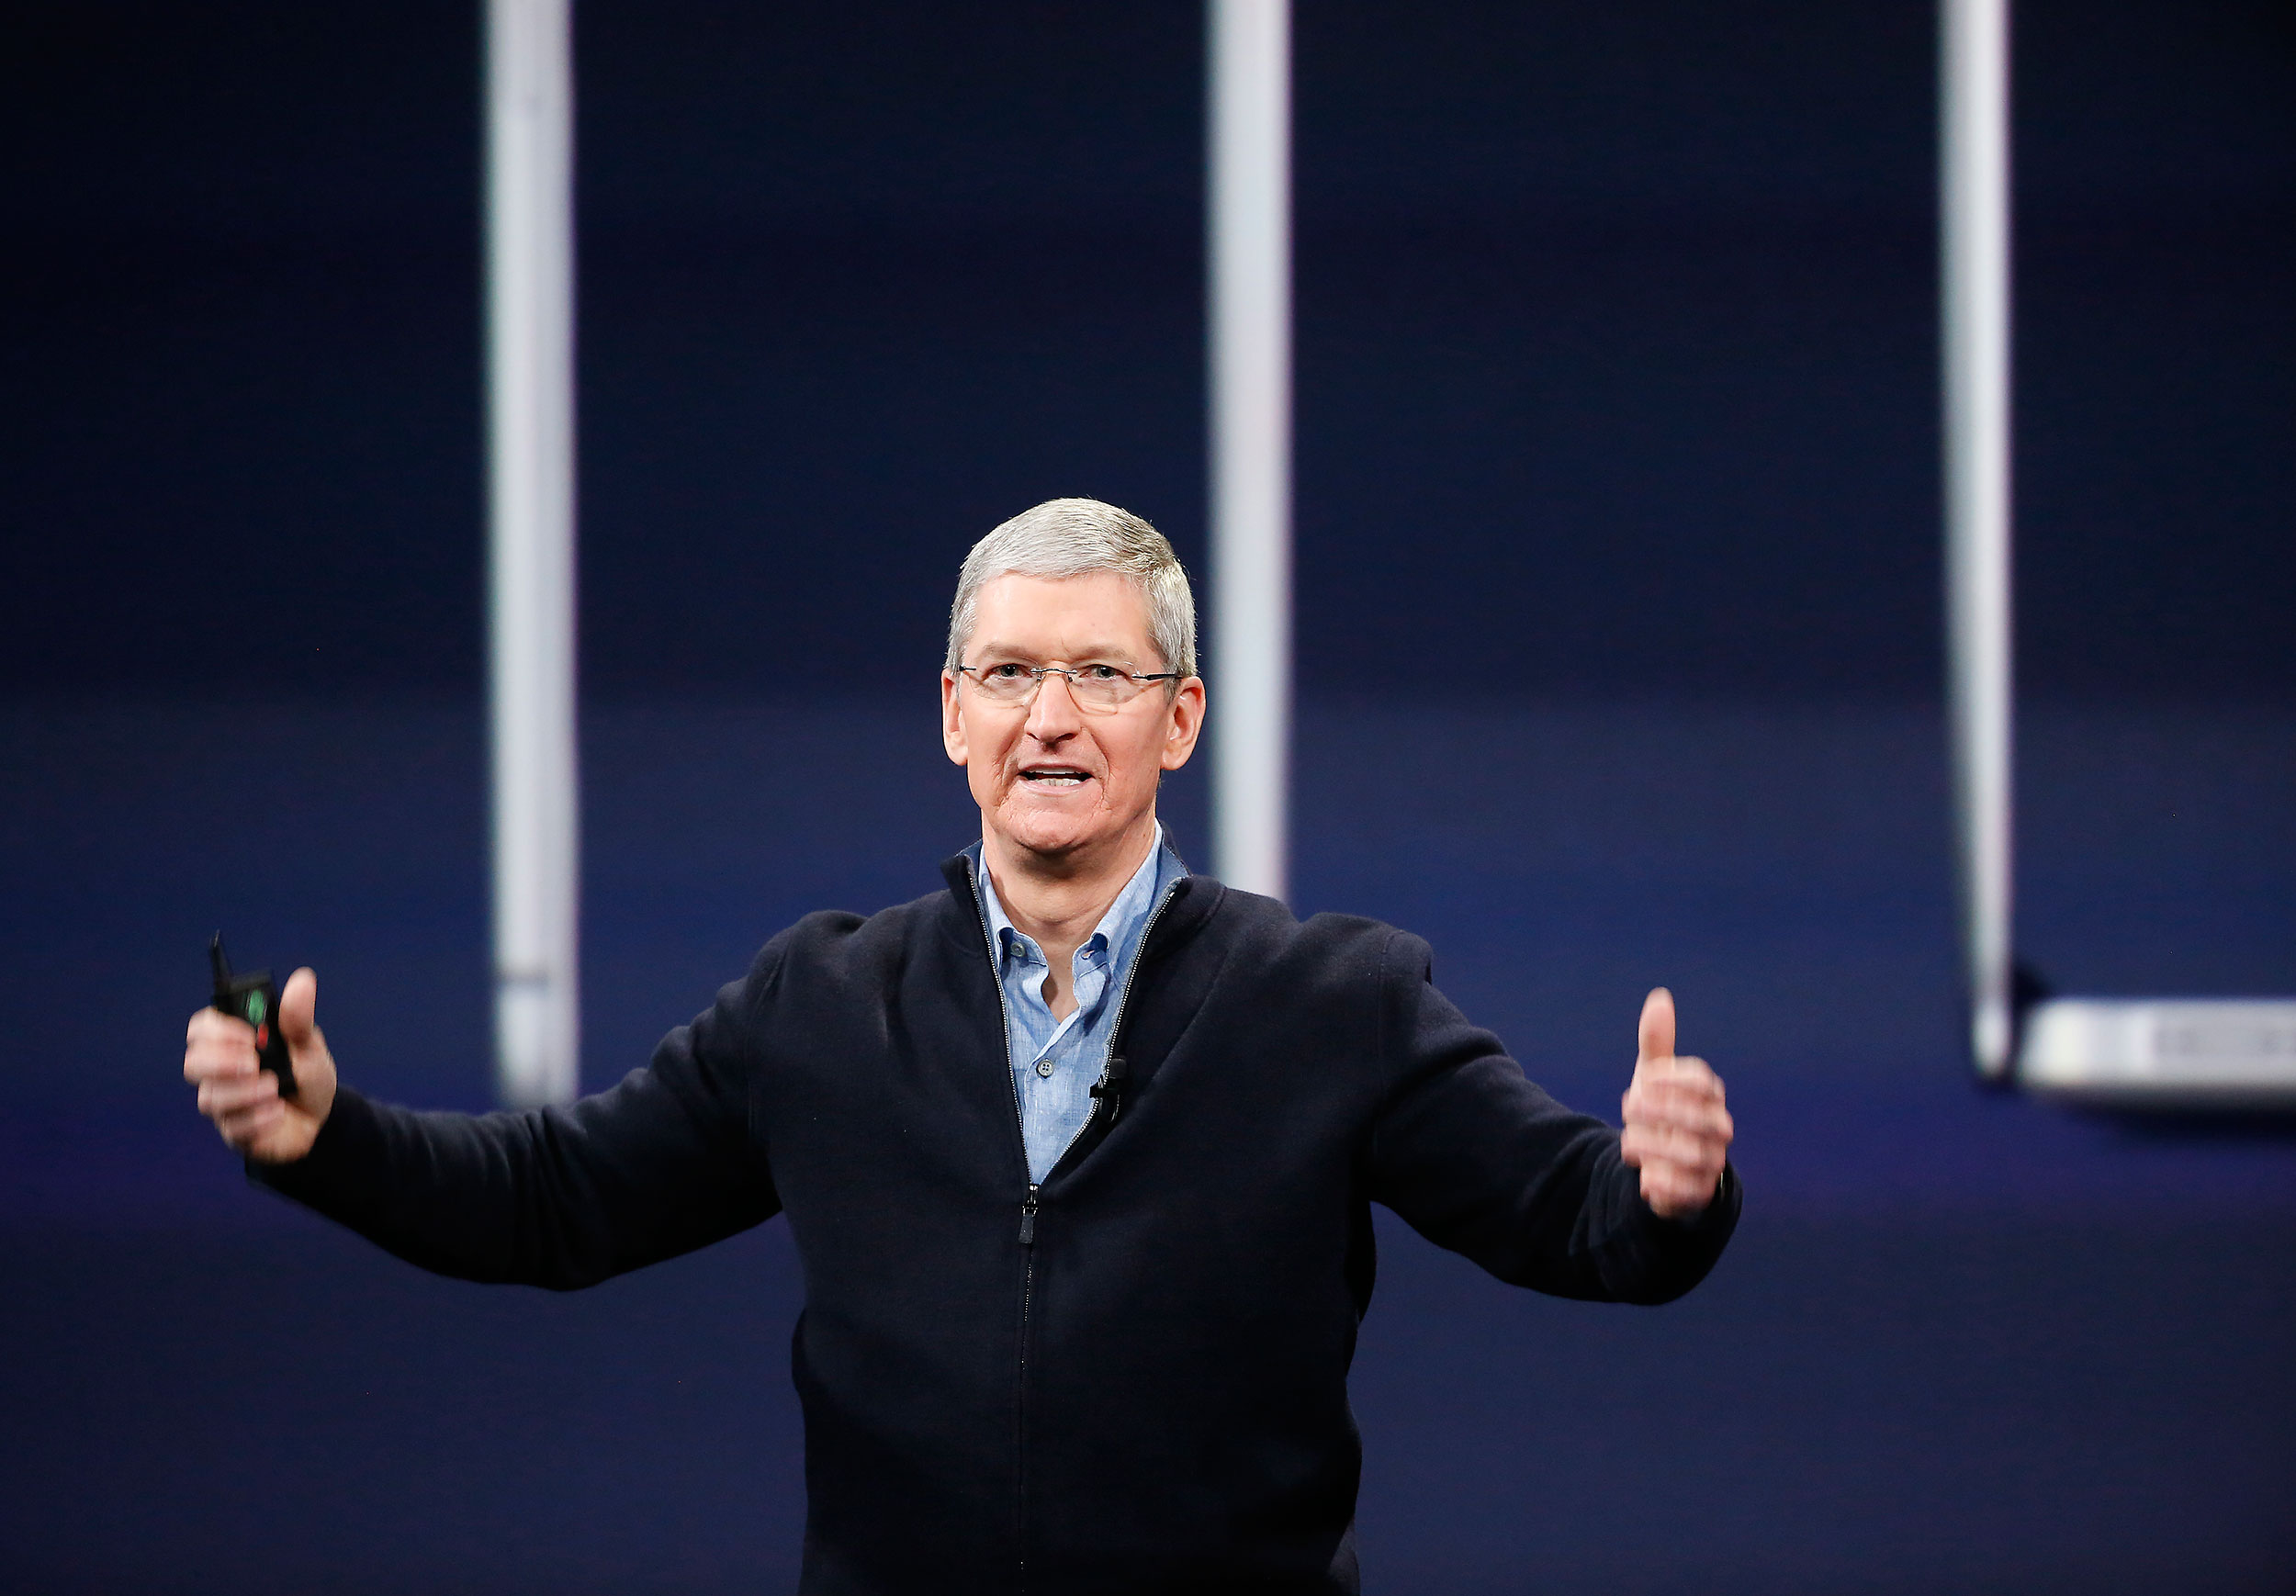 Apple CEO Tim Cook during an Apple special event at the Yerba Buena Center for the Arts on March 9, 2015 in San Francisco, California.
